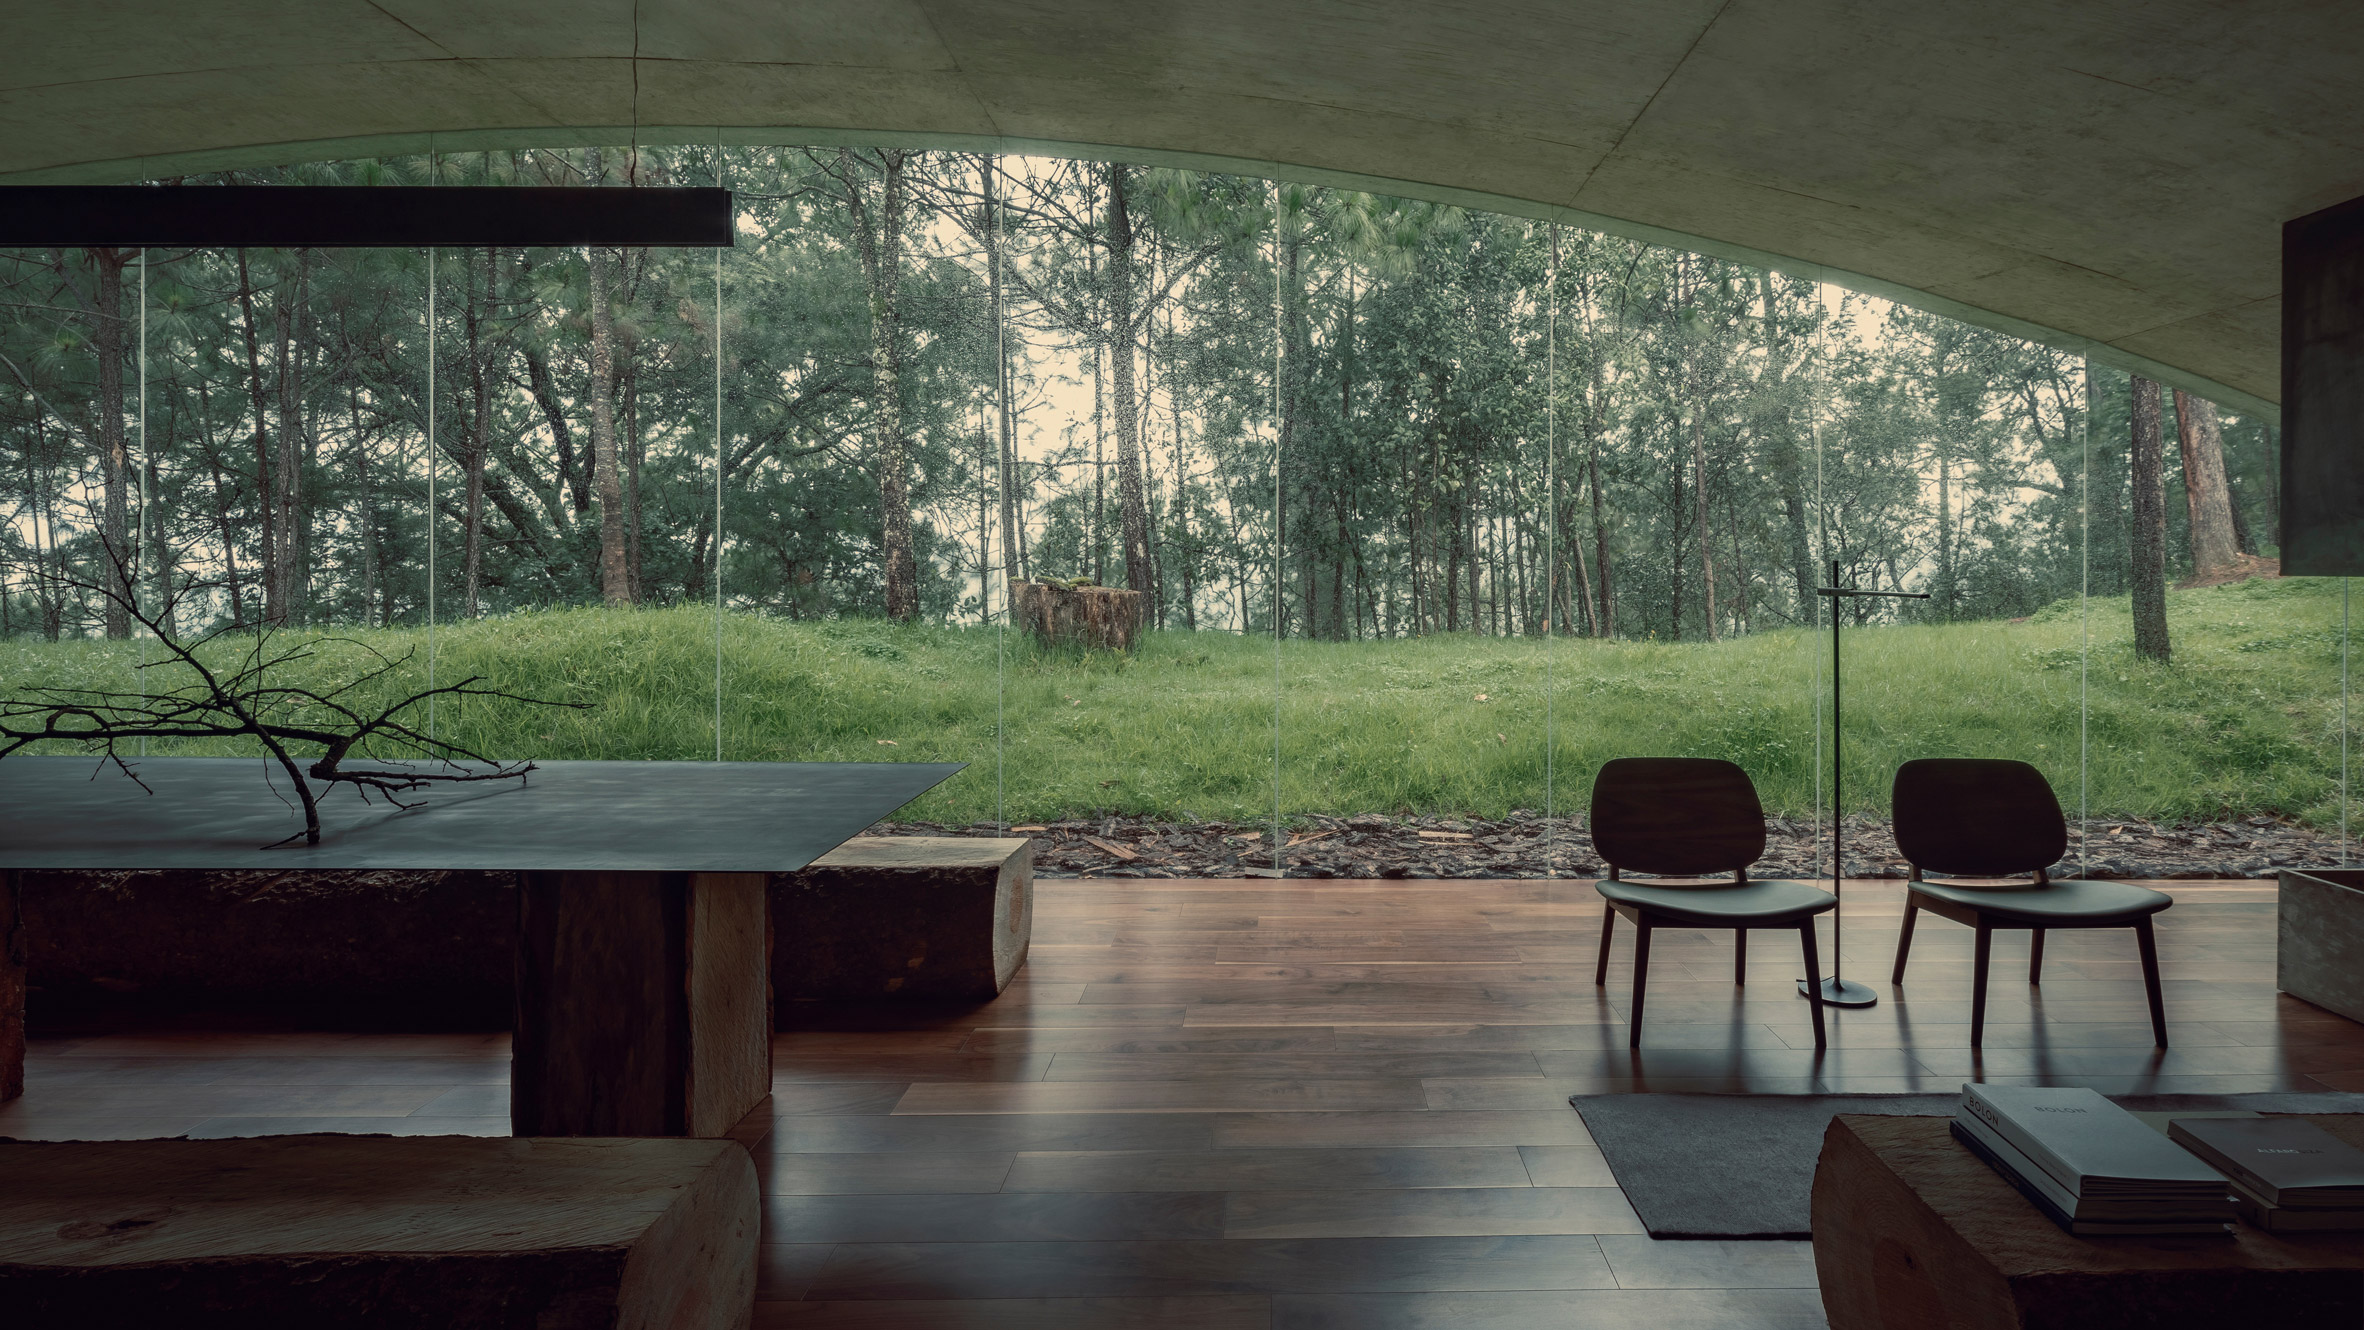 HW Studio's vaulted concrete home nestles into forest outside Morelia